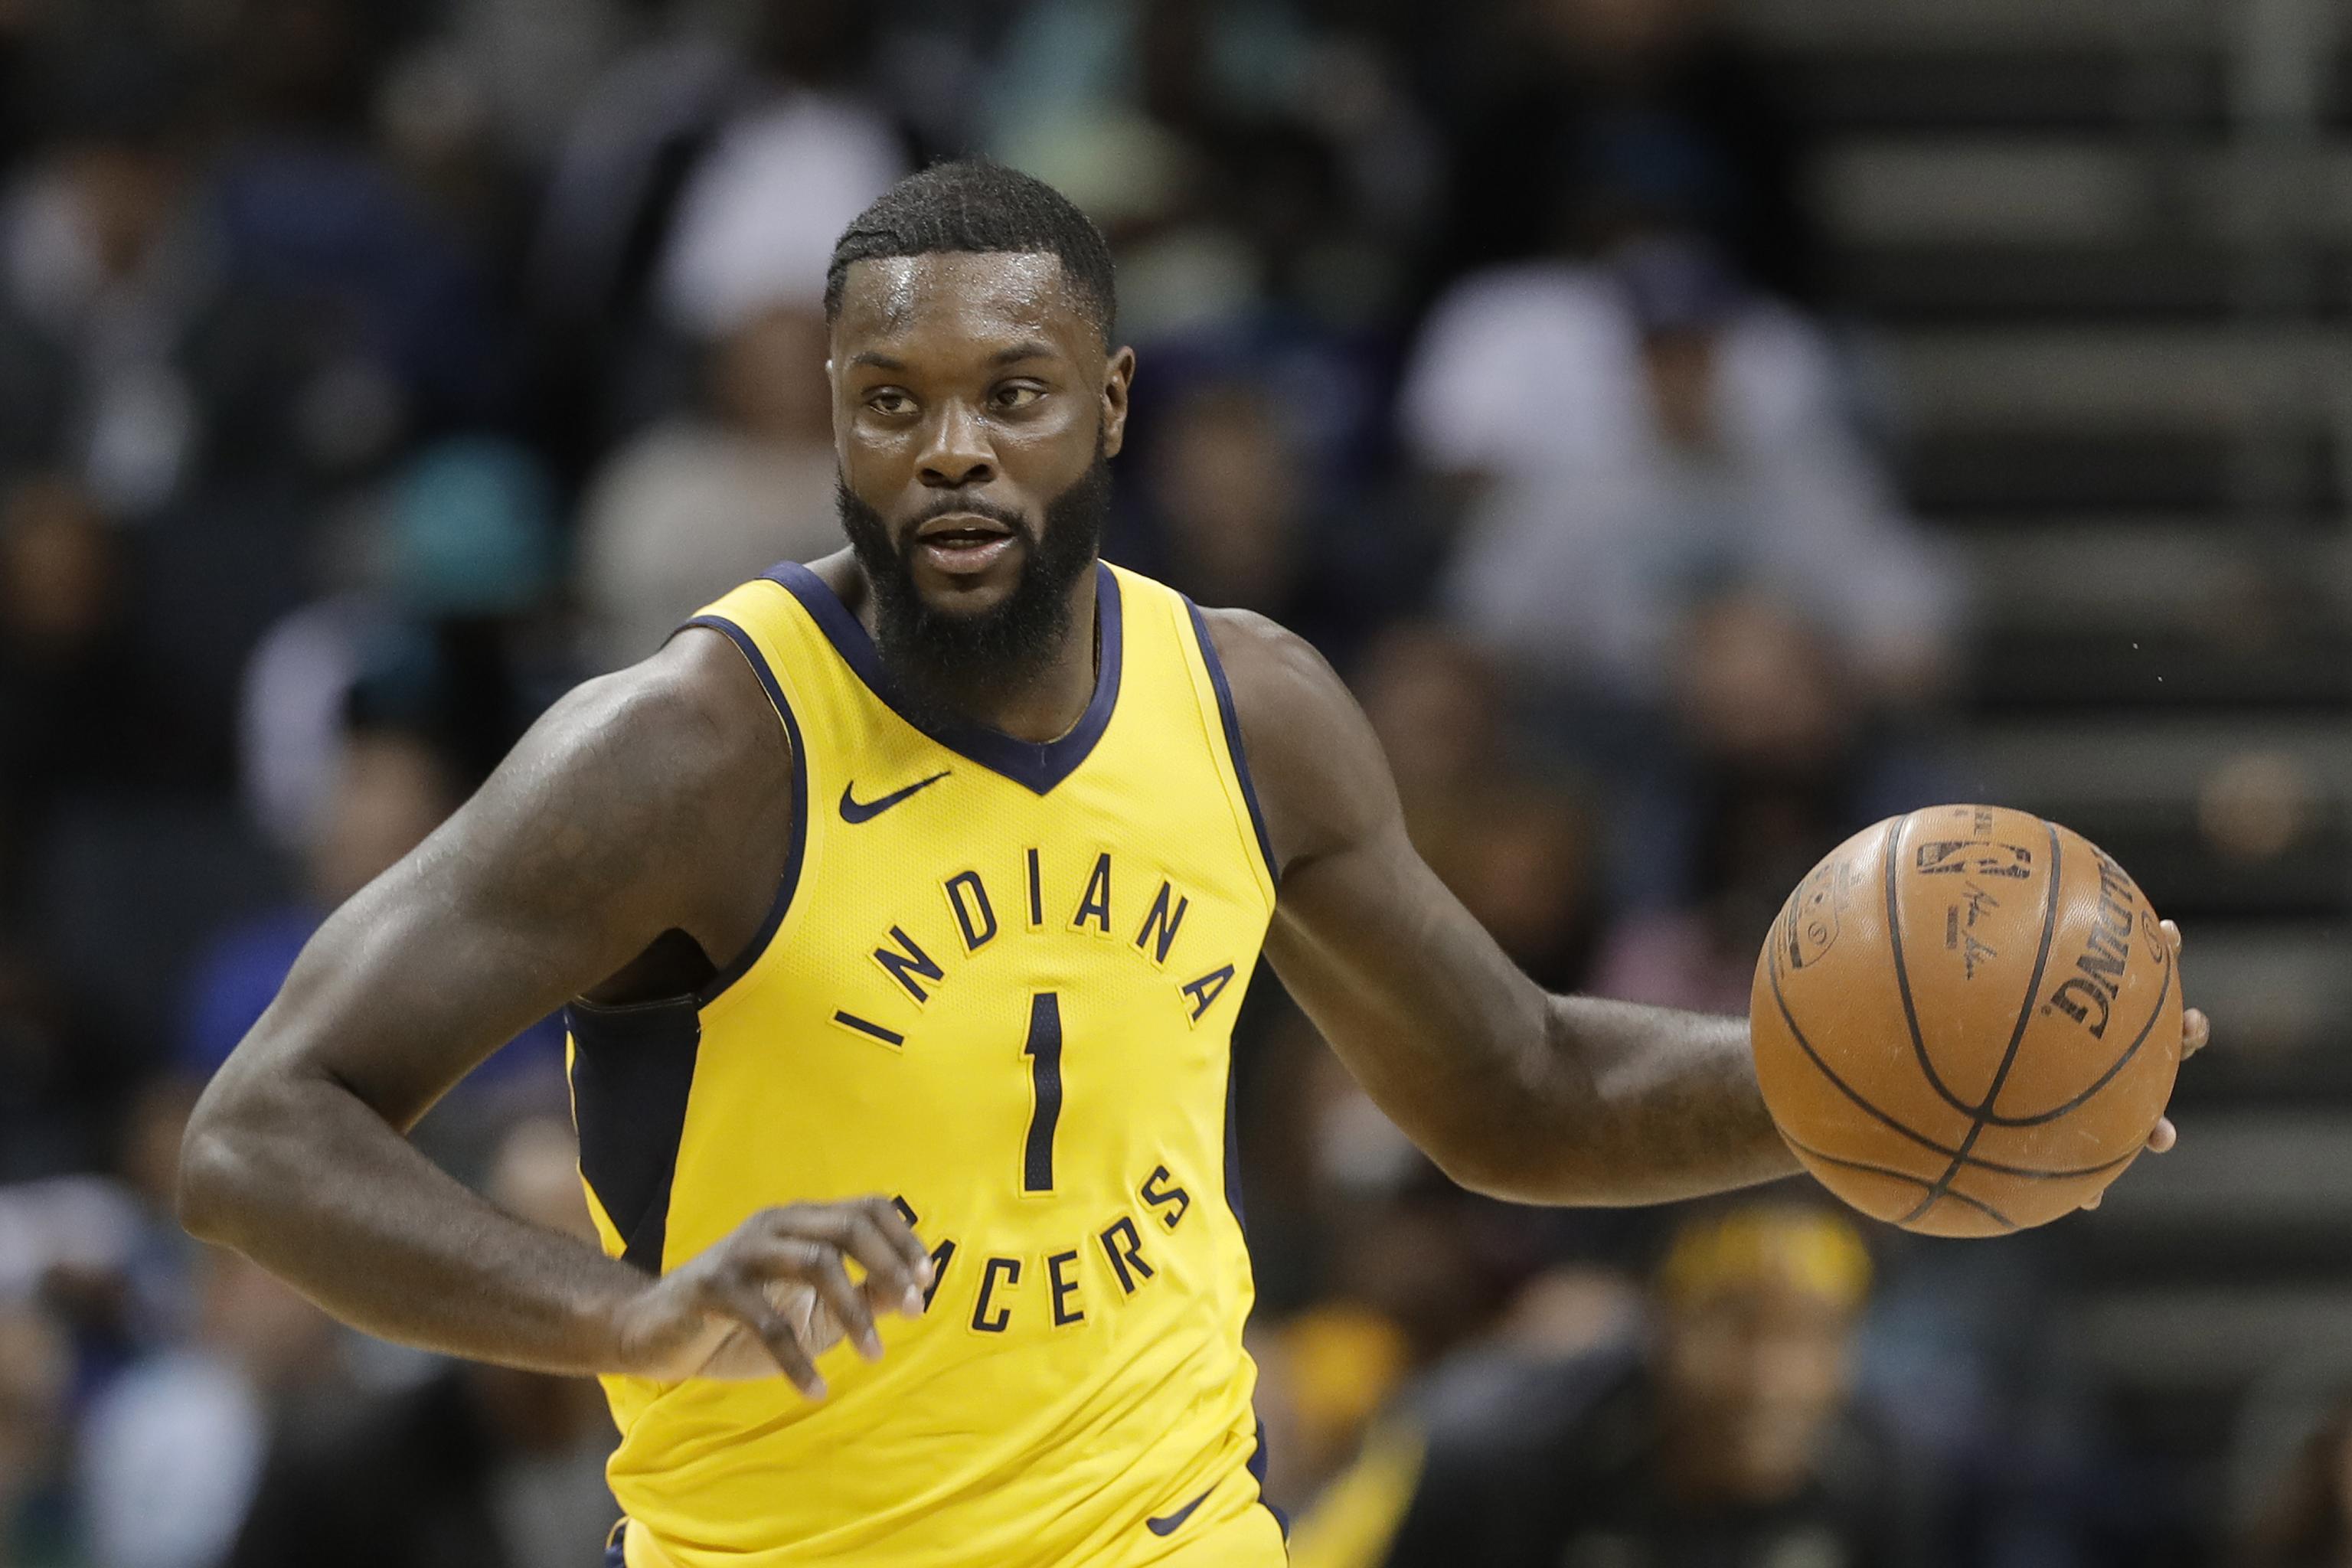 Stephenson's selfish play may cost Pacers  and the future free agent 